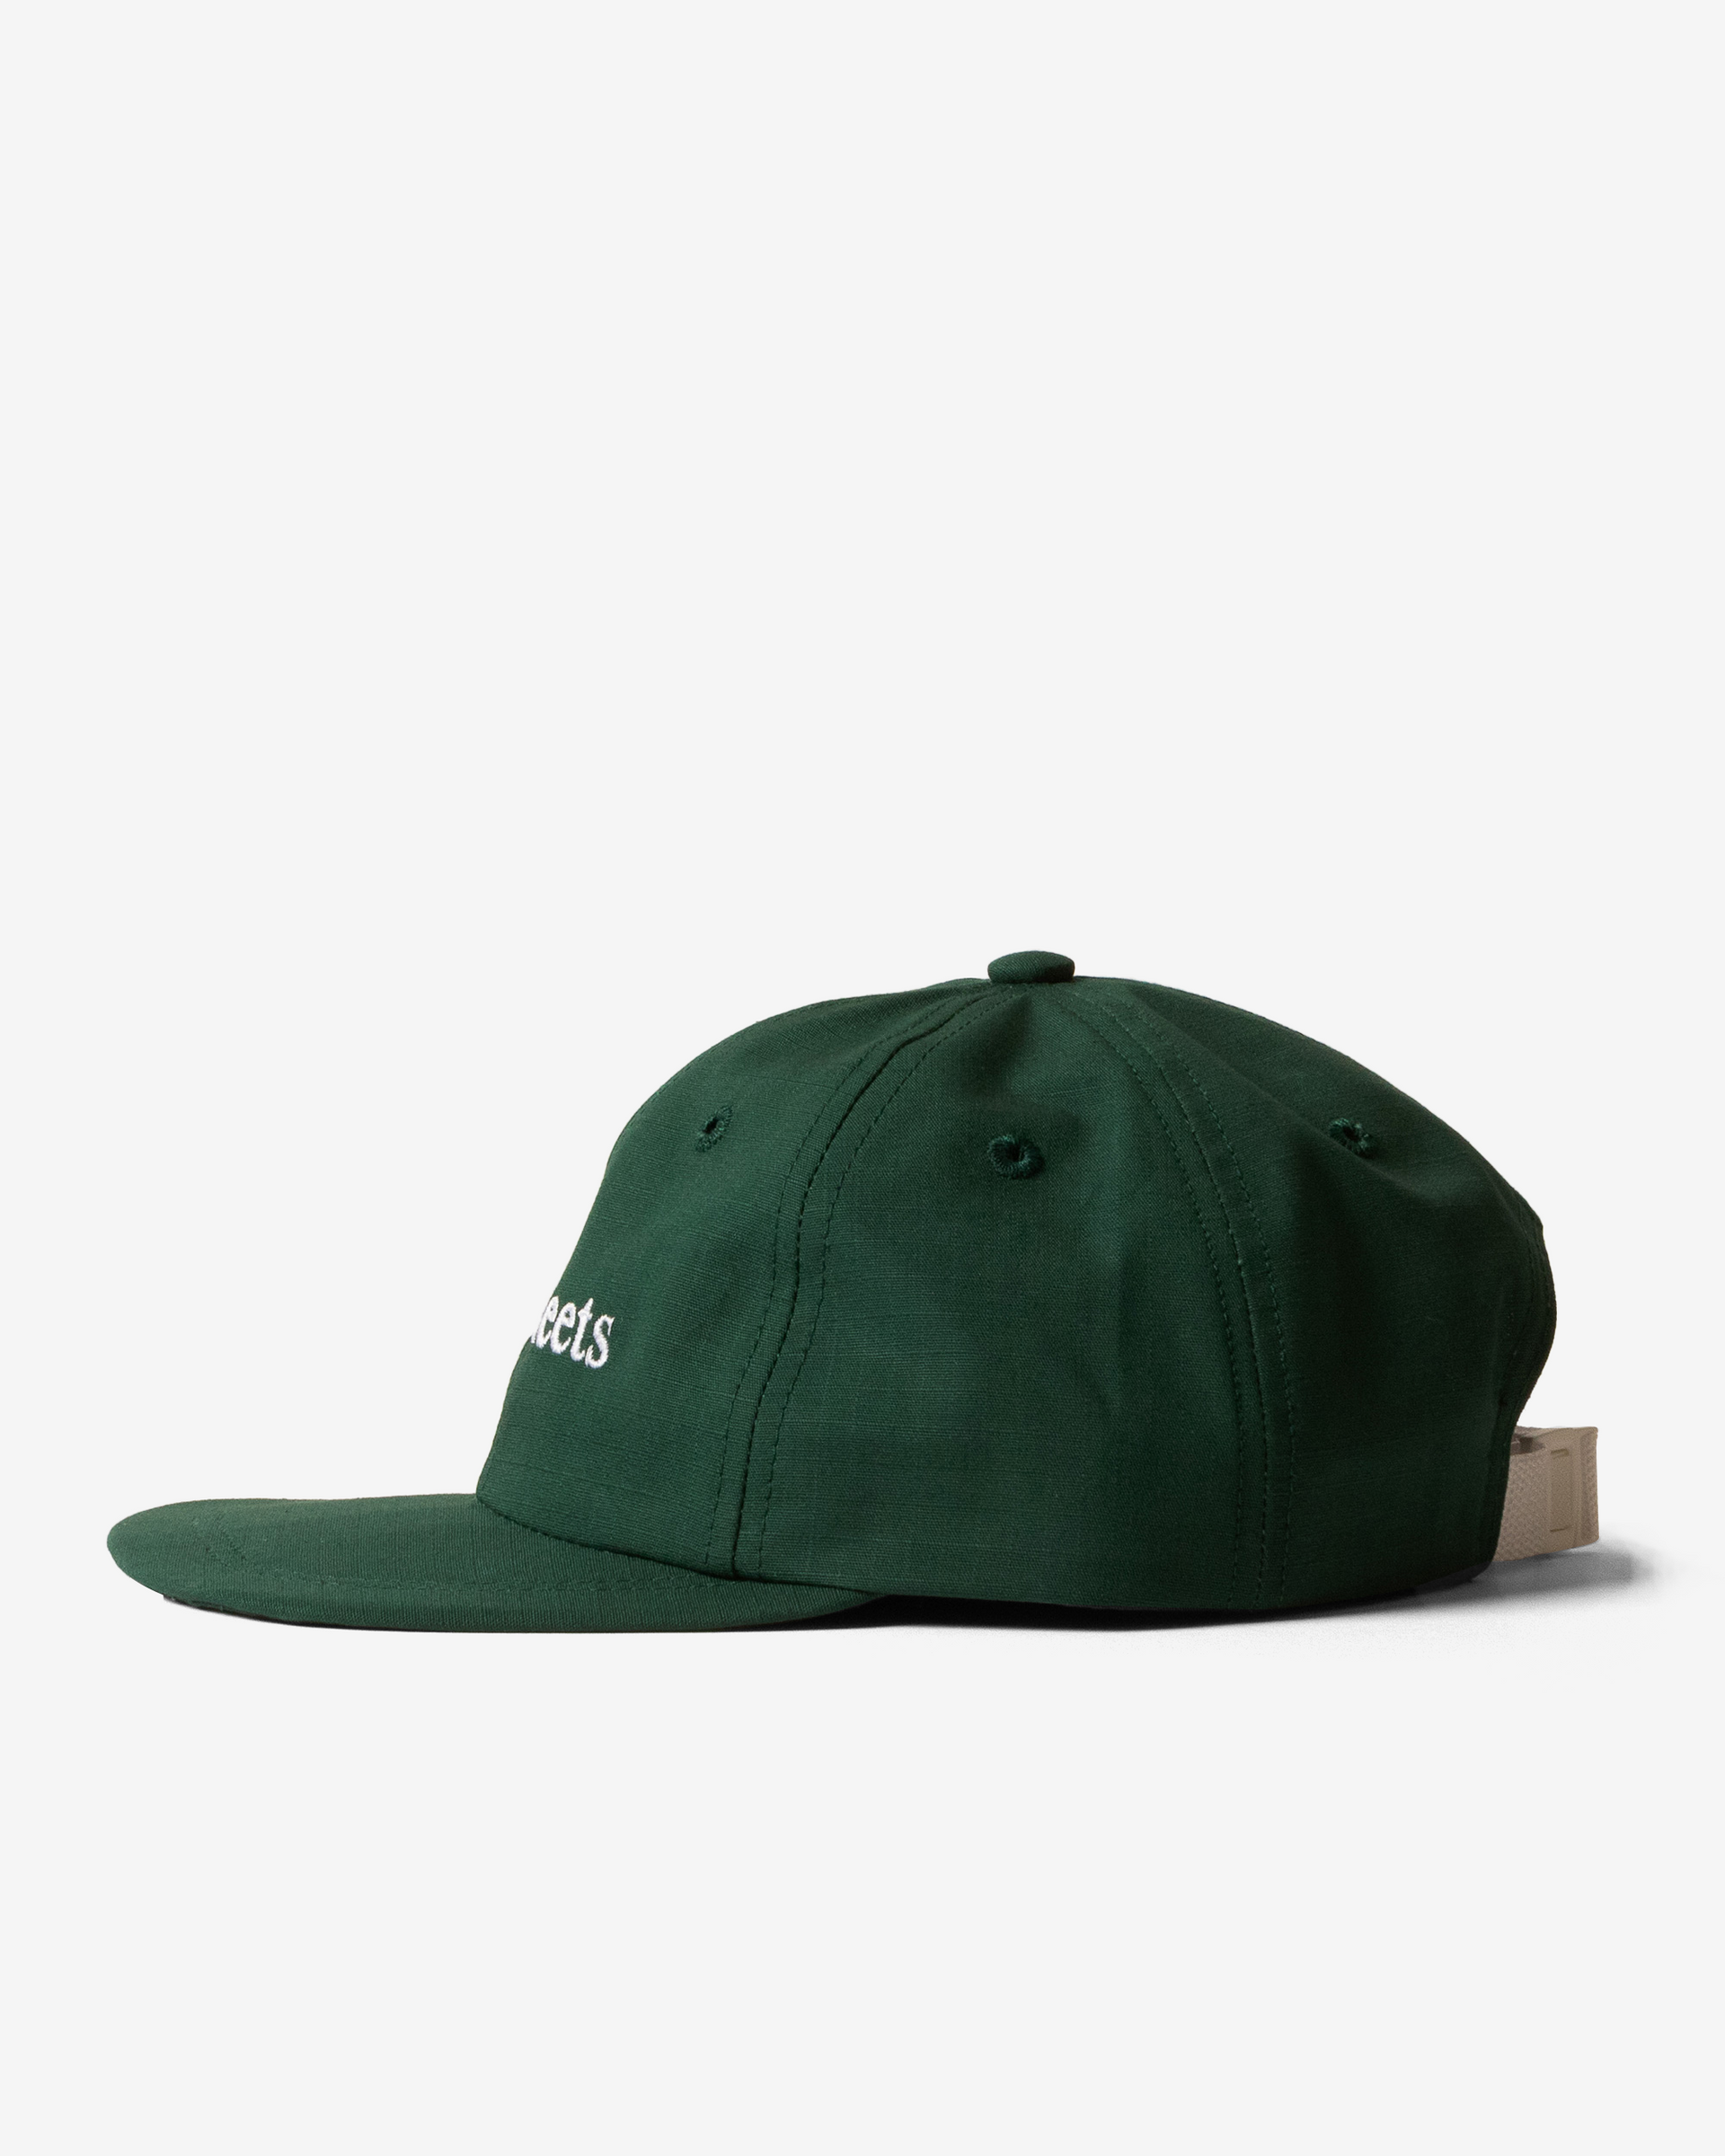 Spreadsheets Hat DLUX